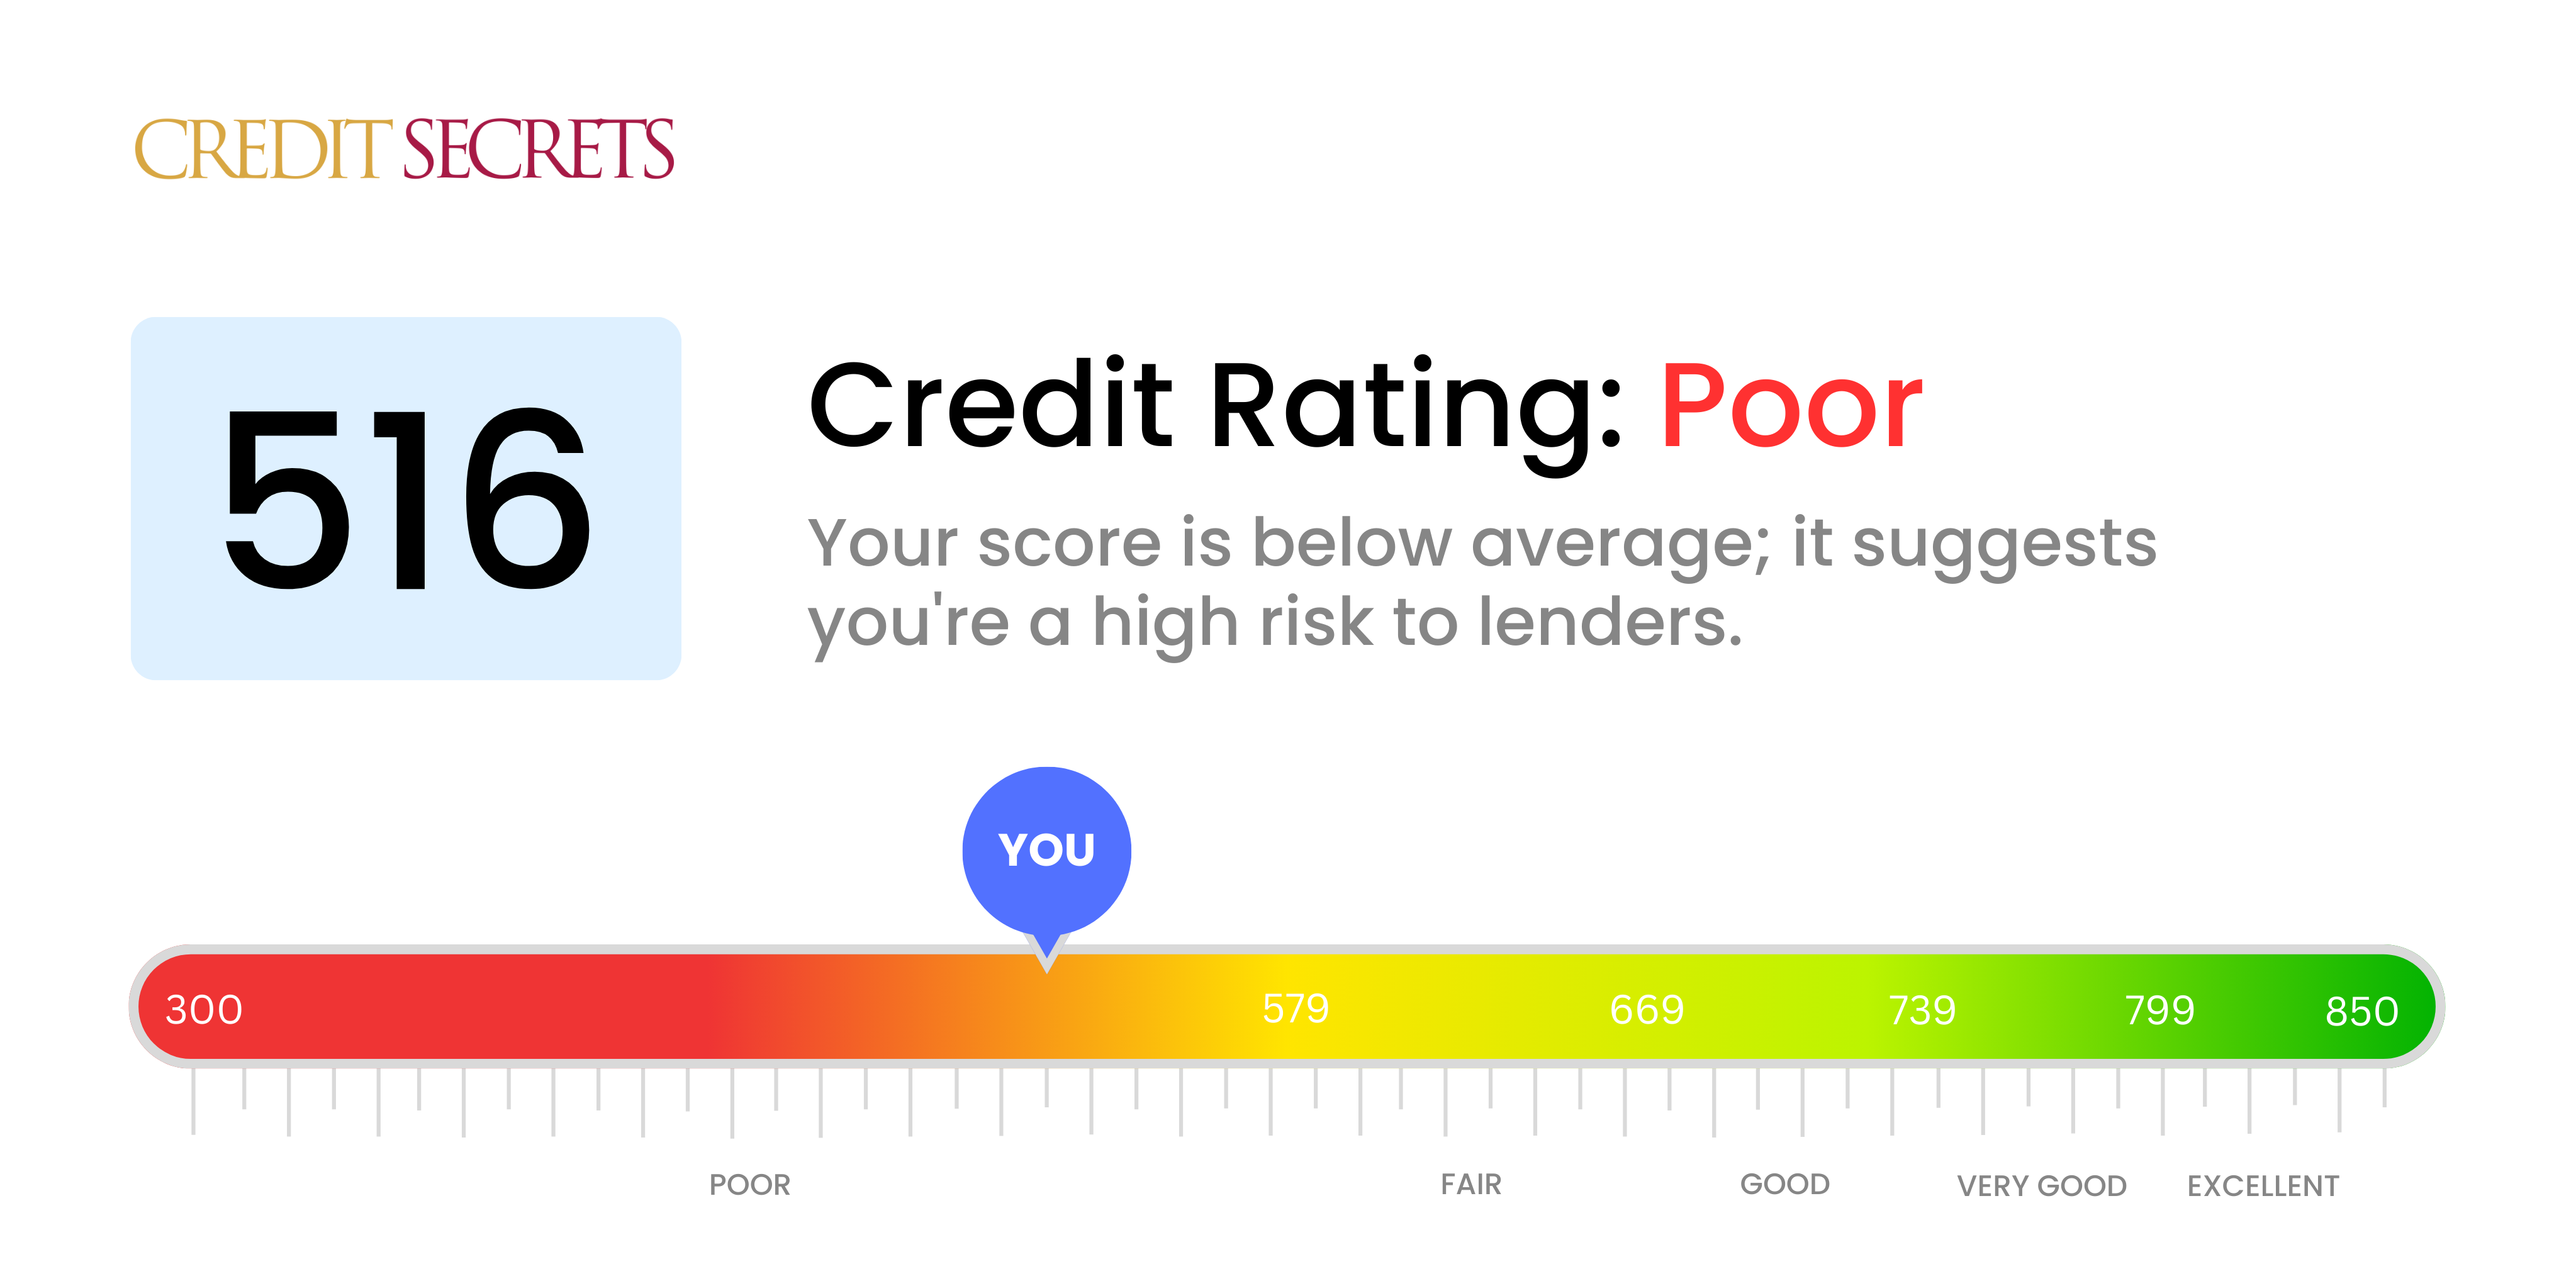 Is 516 a good credit score?